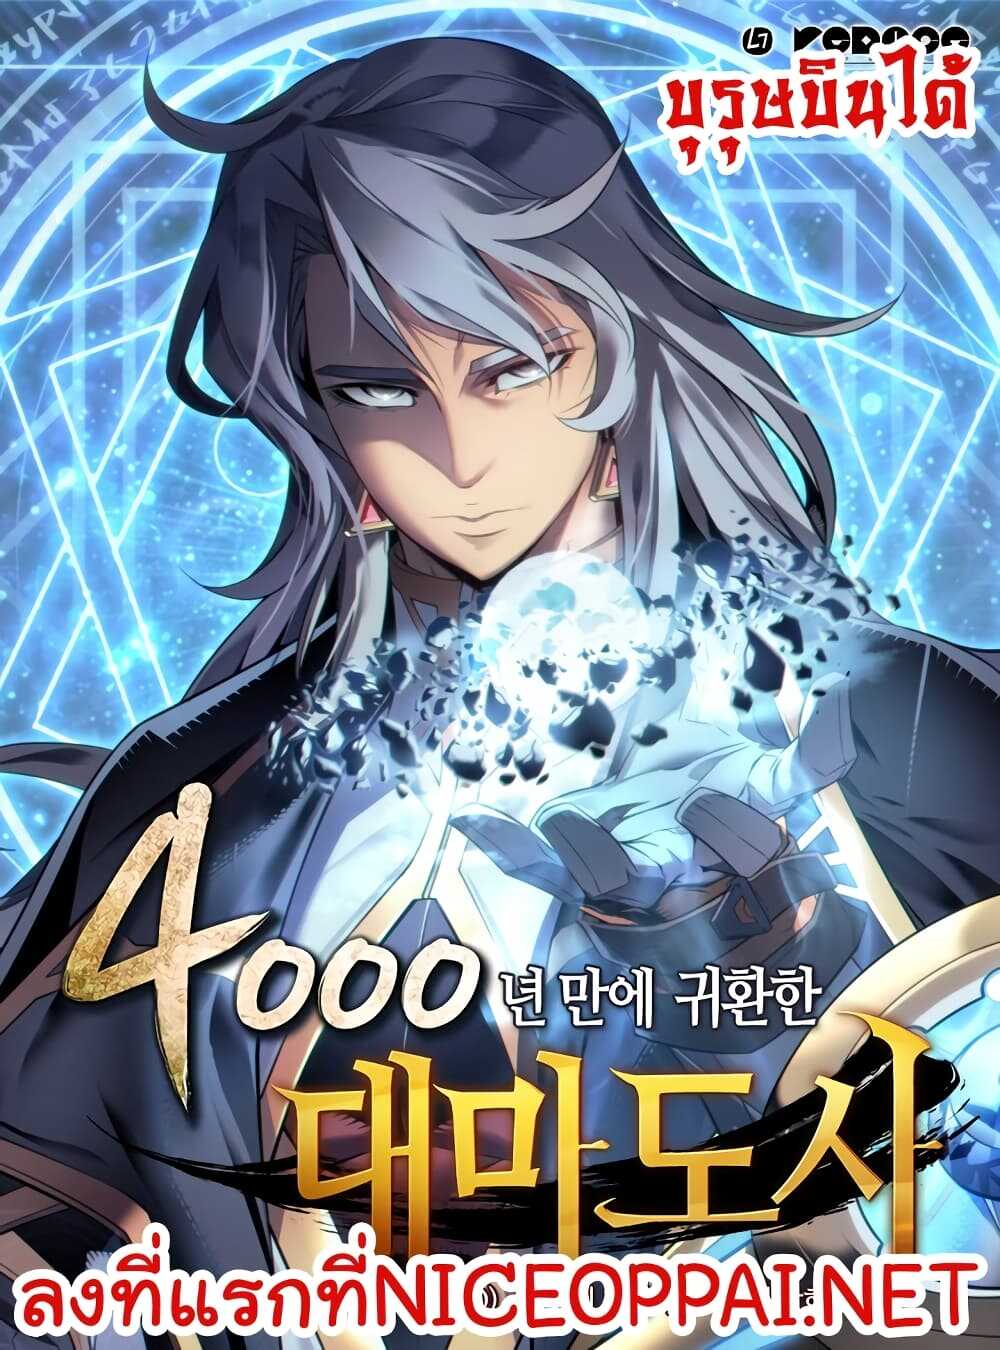 The Great Mage Returns After 4000 Years 27 (1)